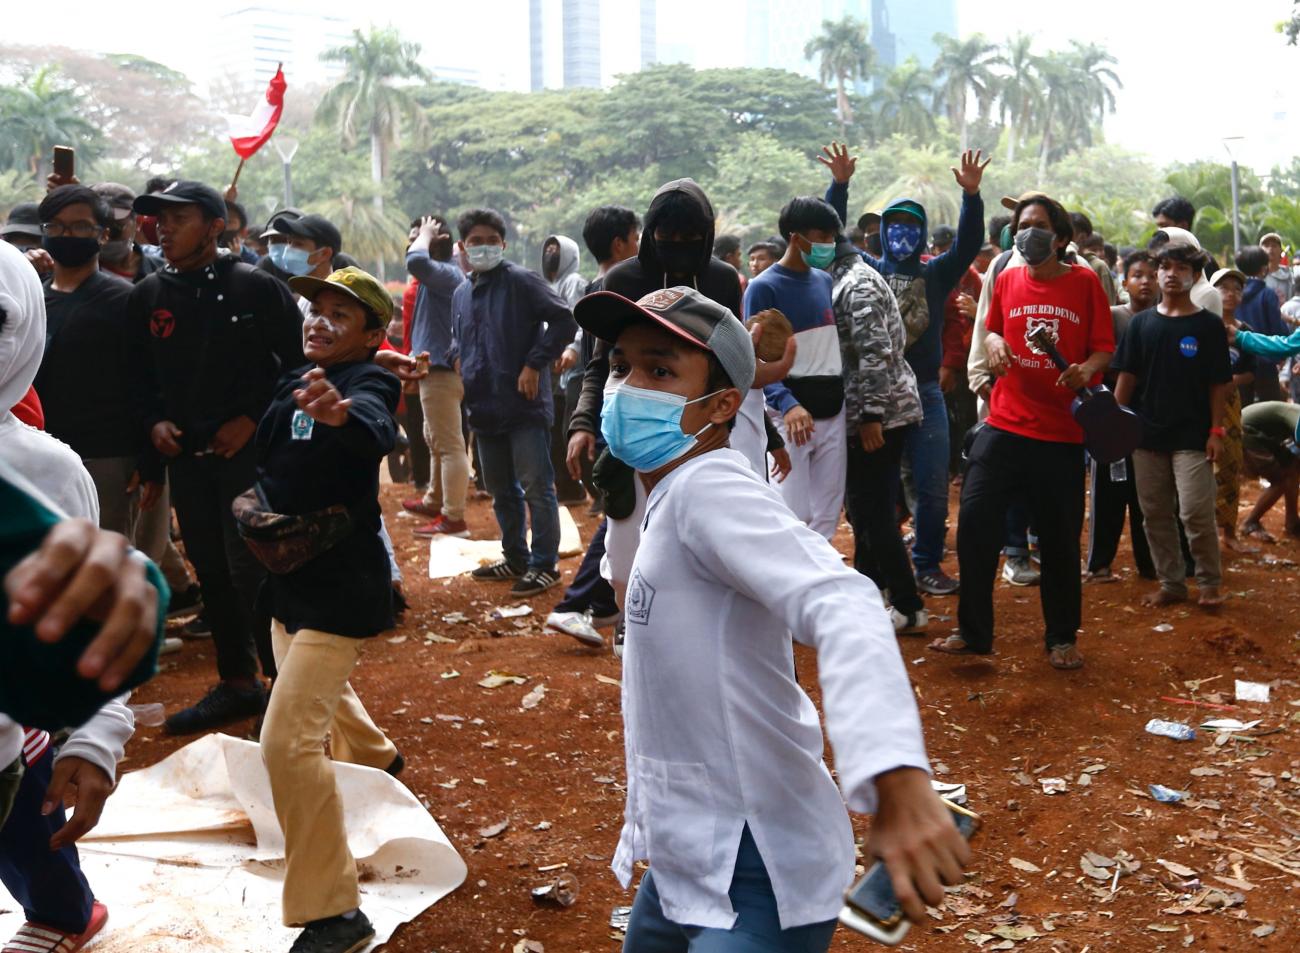 Demonstrators throw stones during a protest against the government's labor reforms bill in Jakarta, Indonesia, October 13, 2020.